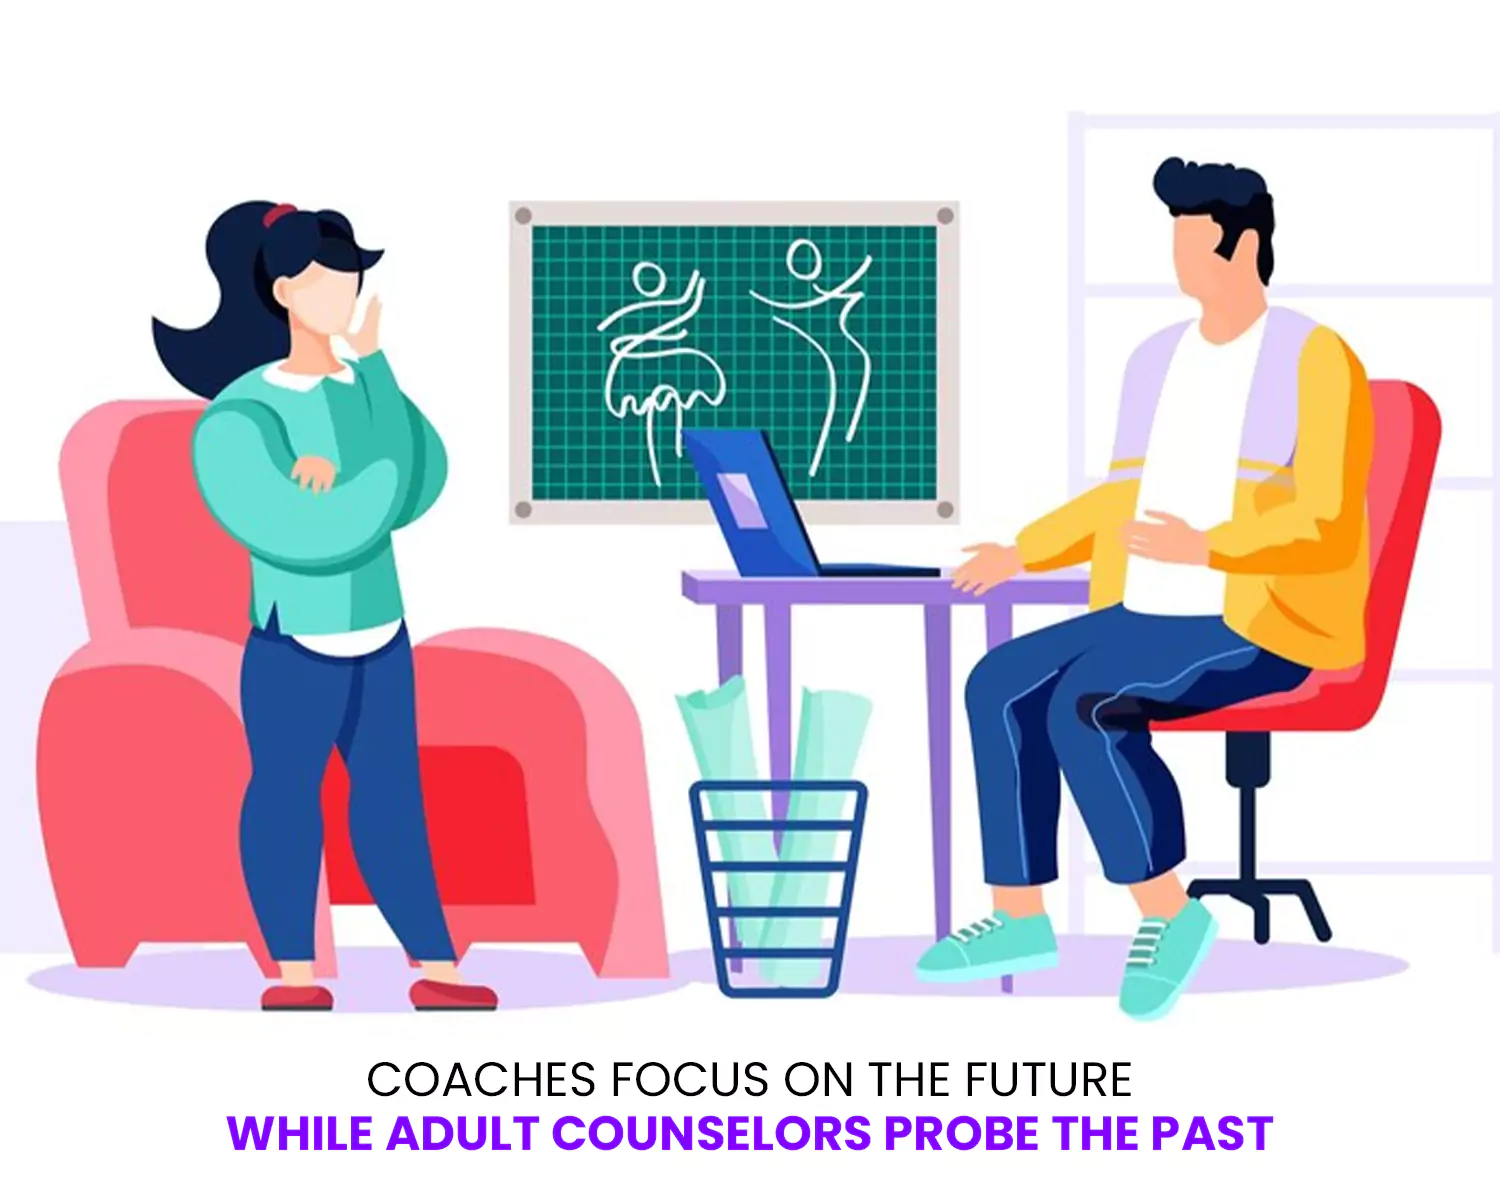 Coaches Focus on the Future, While Adult Counselors Probe the Past